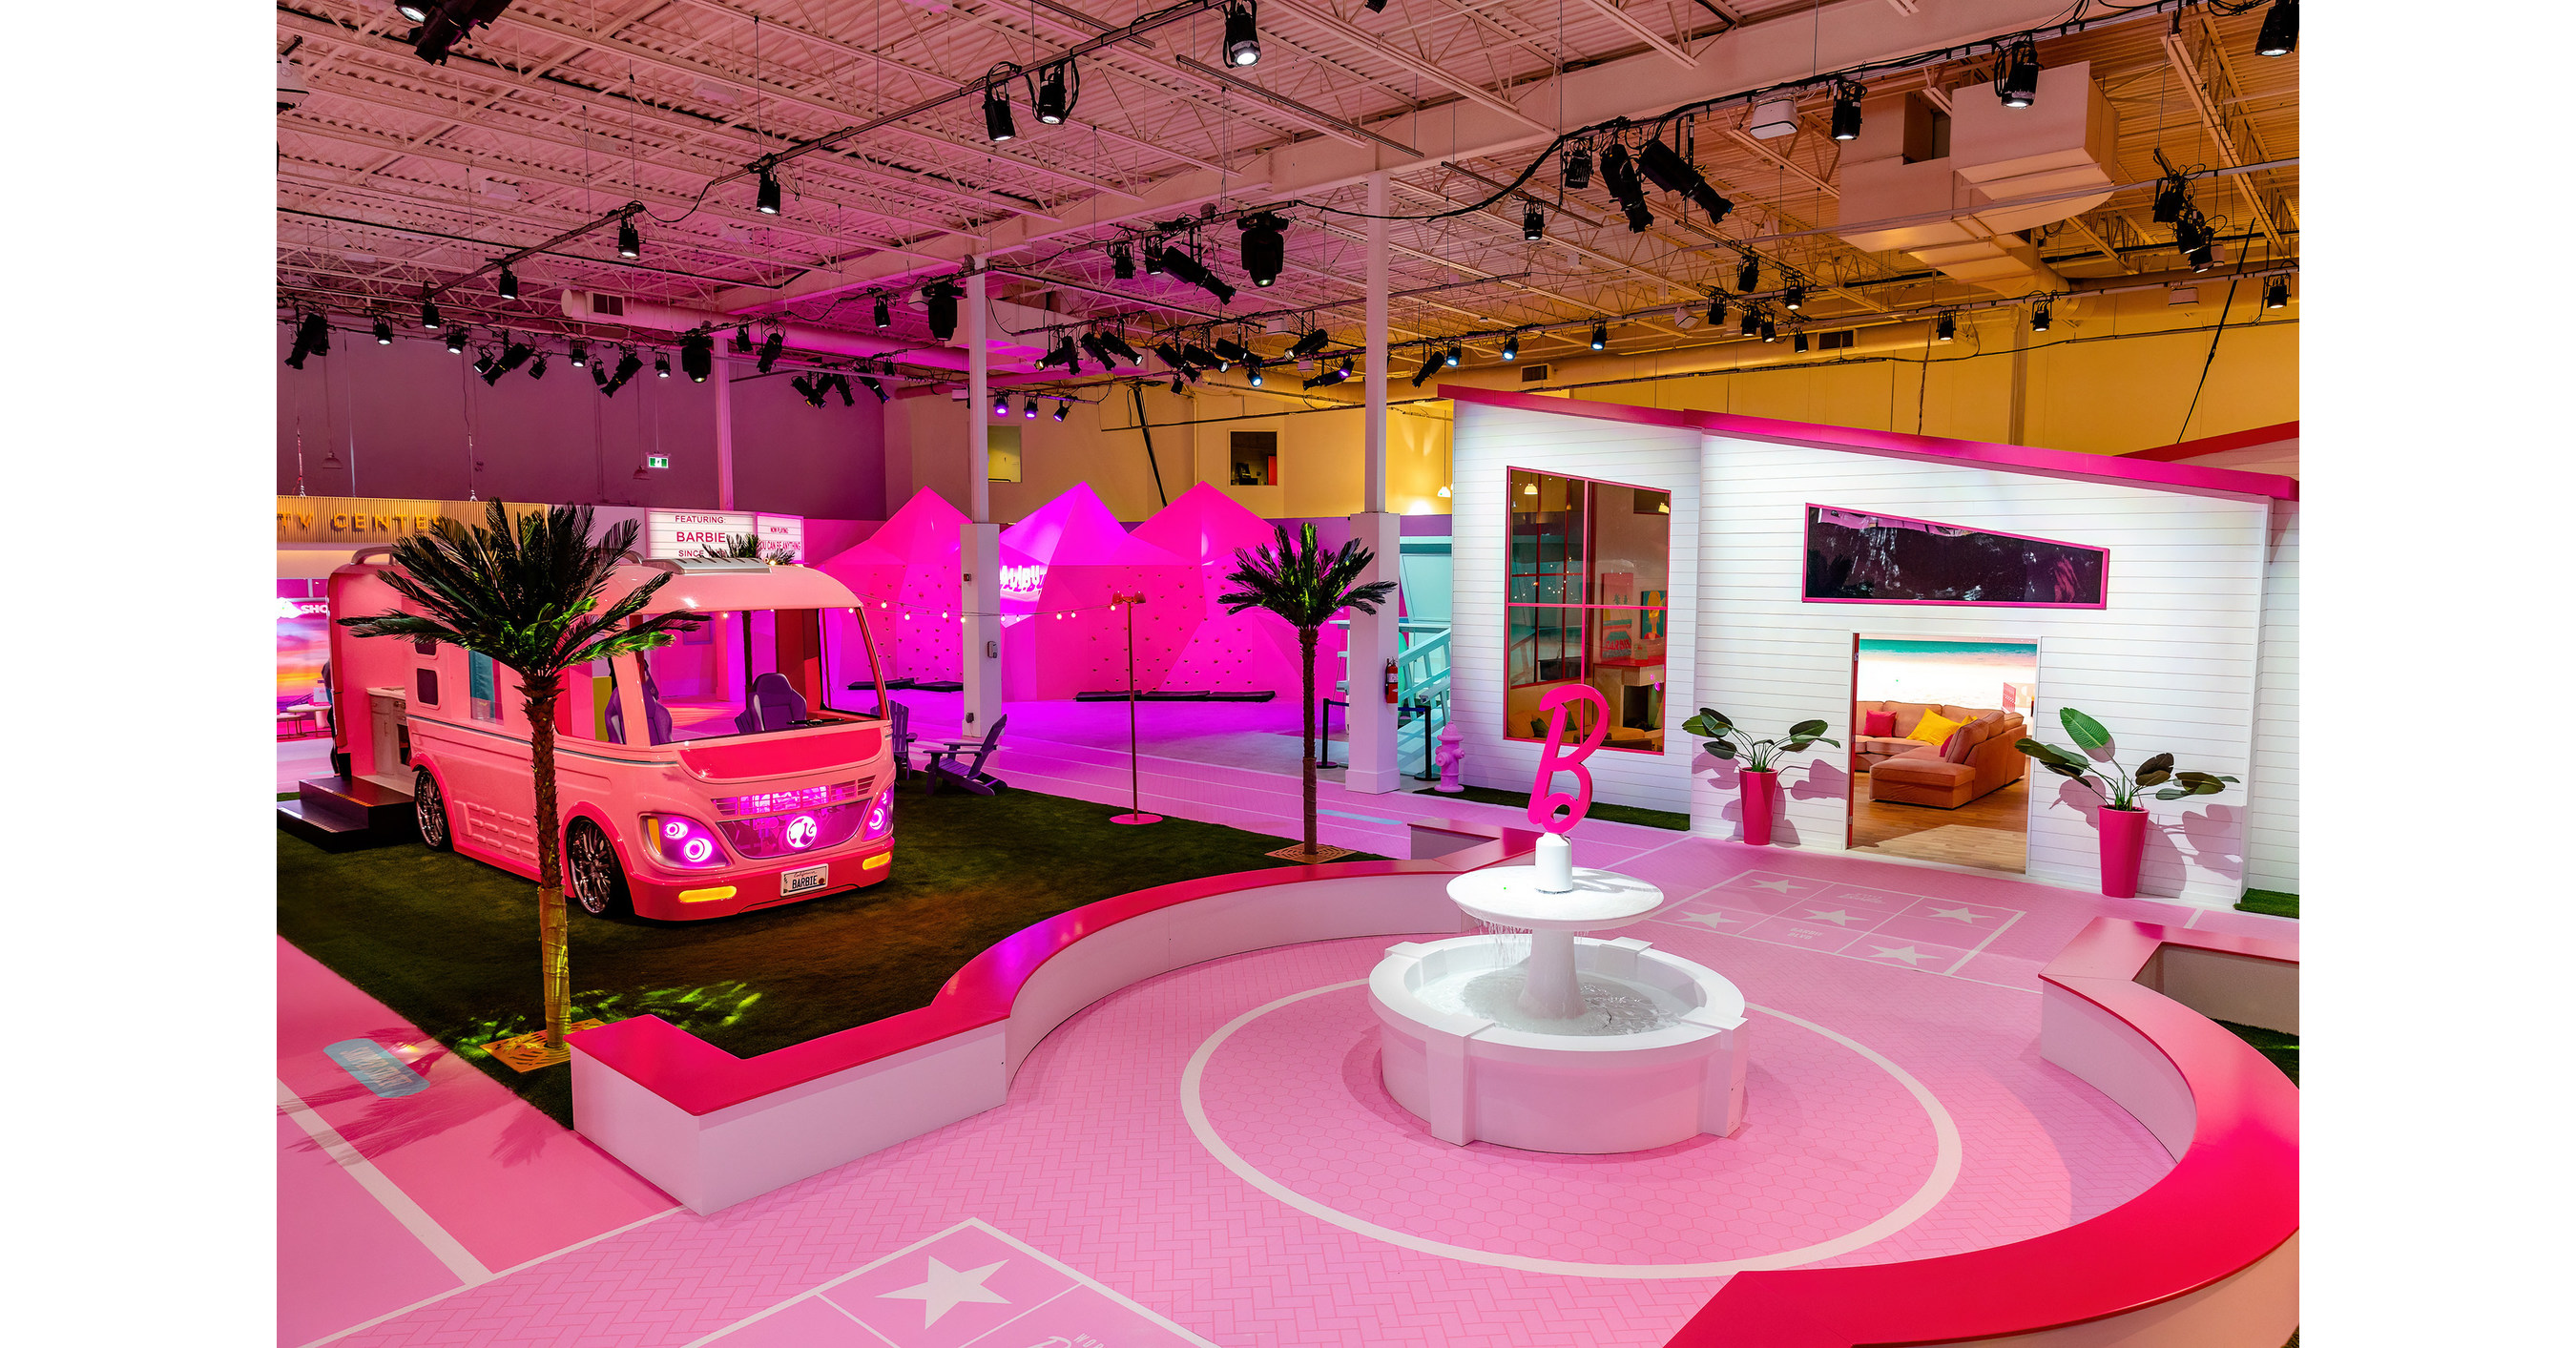 Lifesize World of Barbie Interactive Attraction Opens at Square One